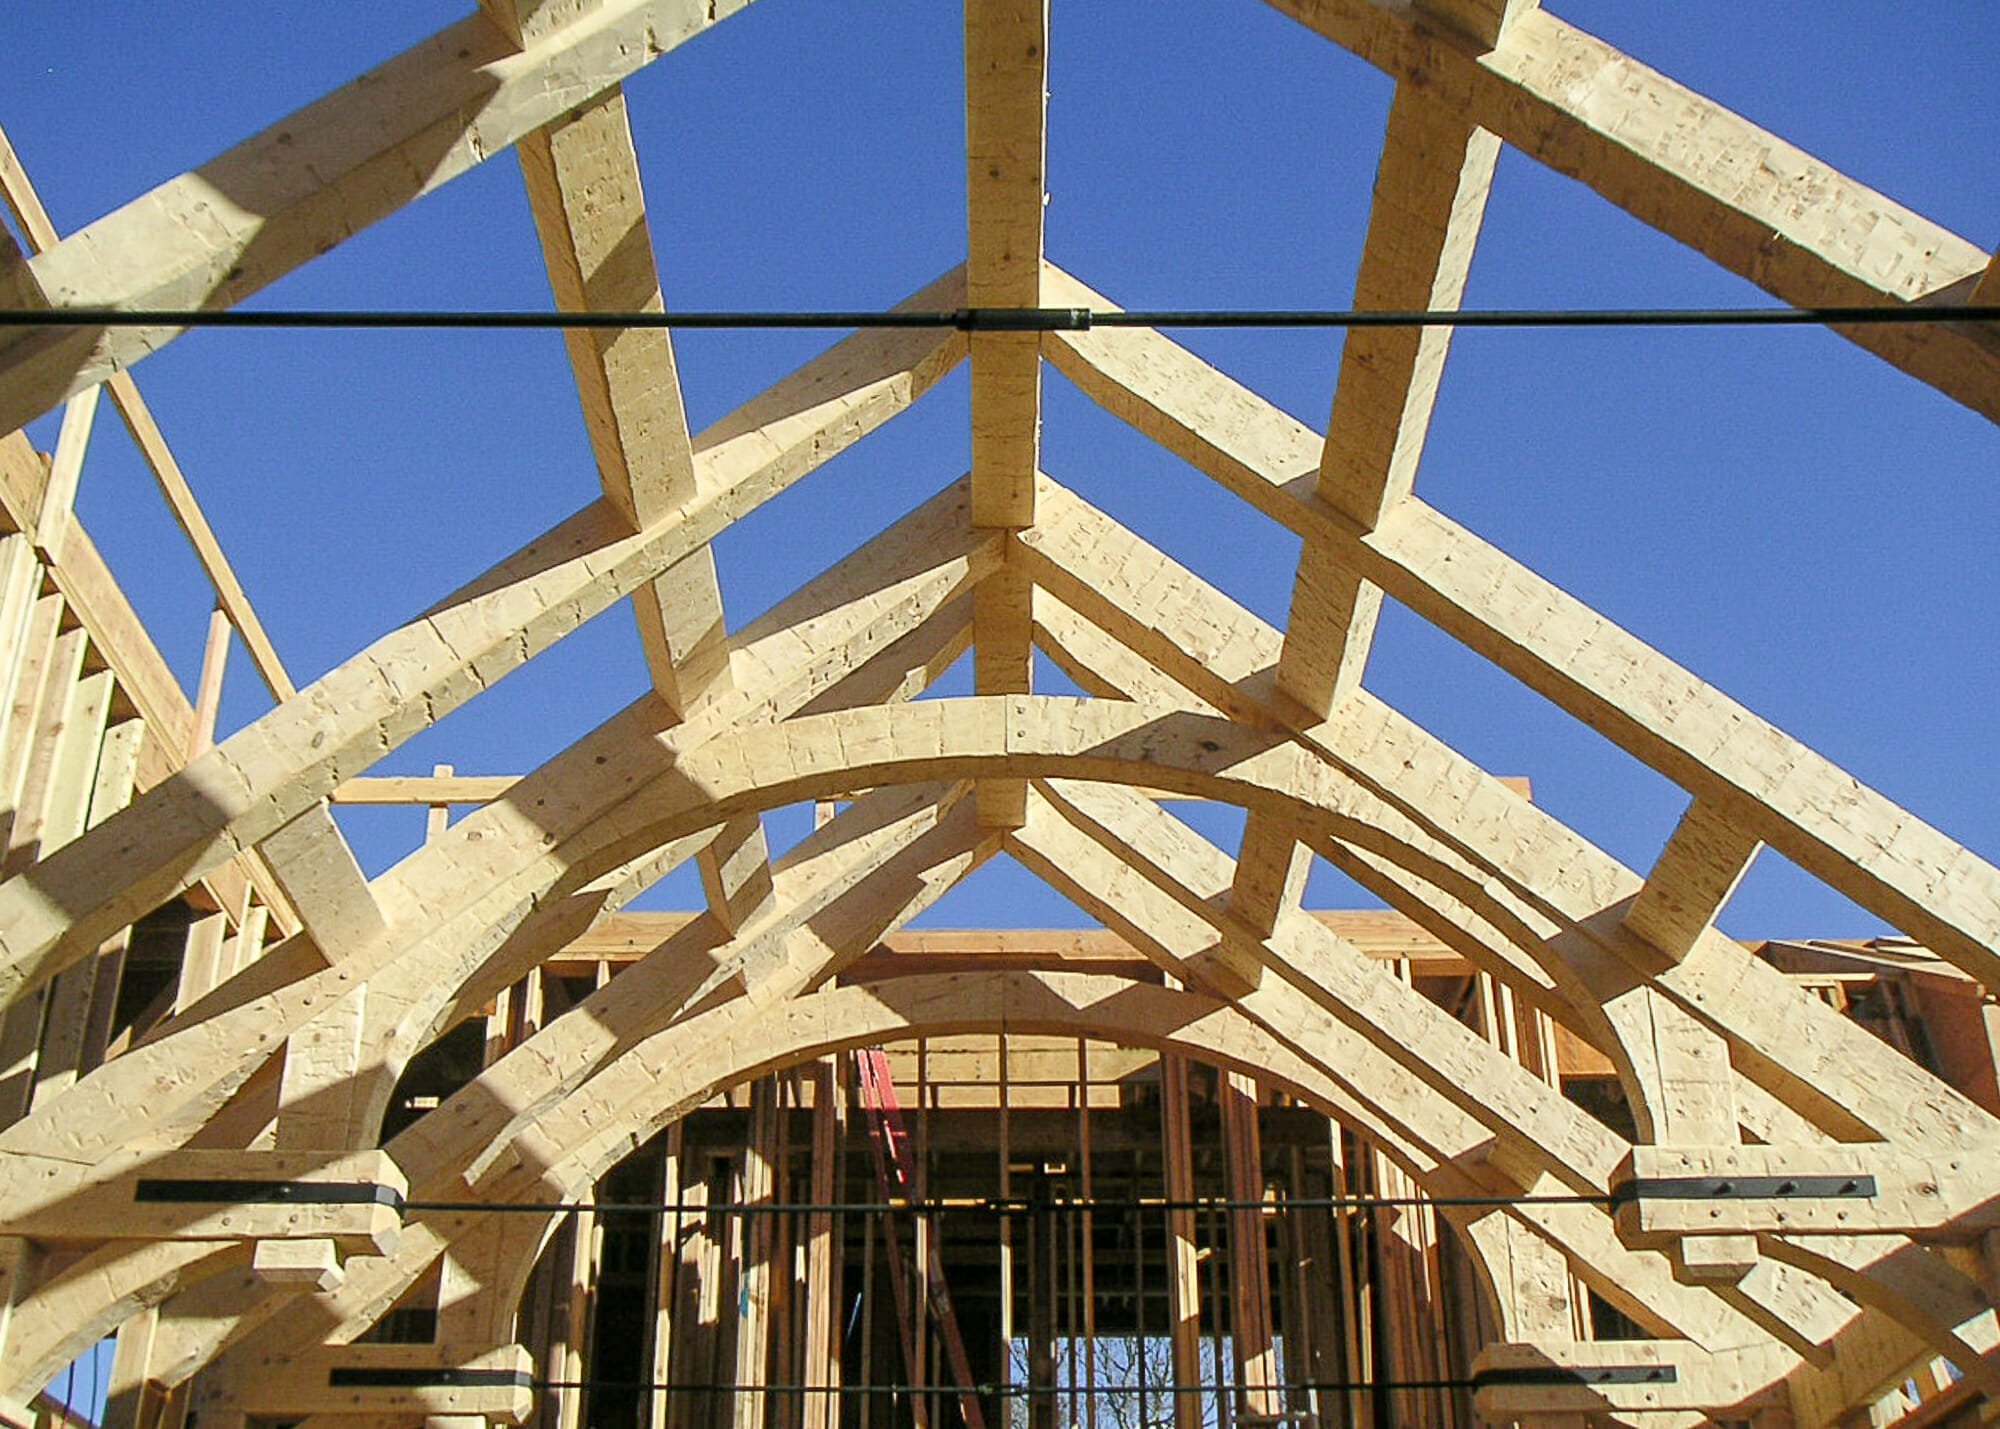 Rough Hewn Timber Trusses